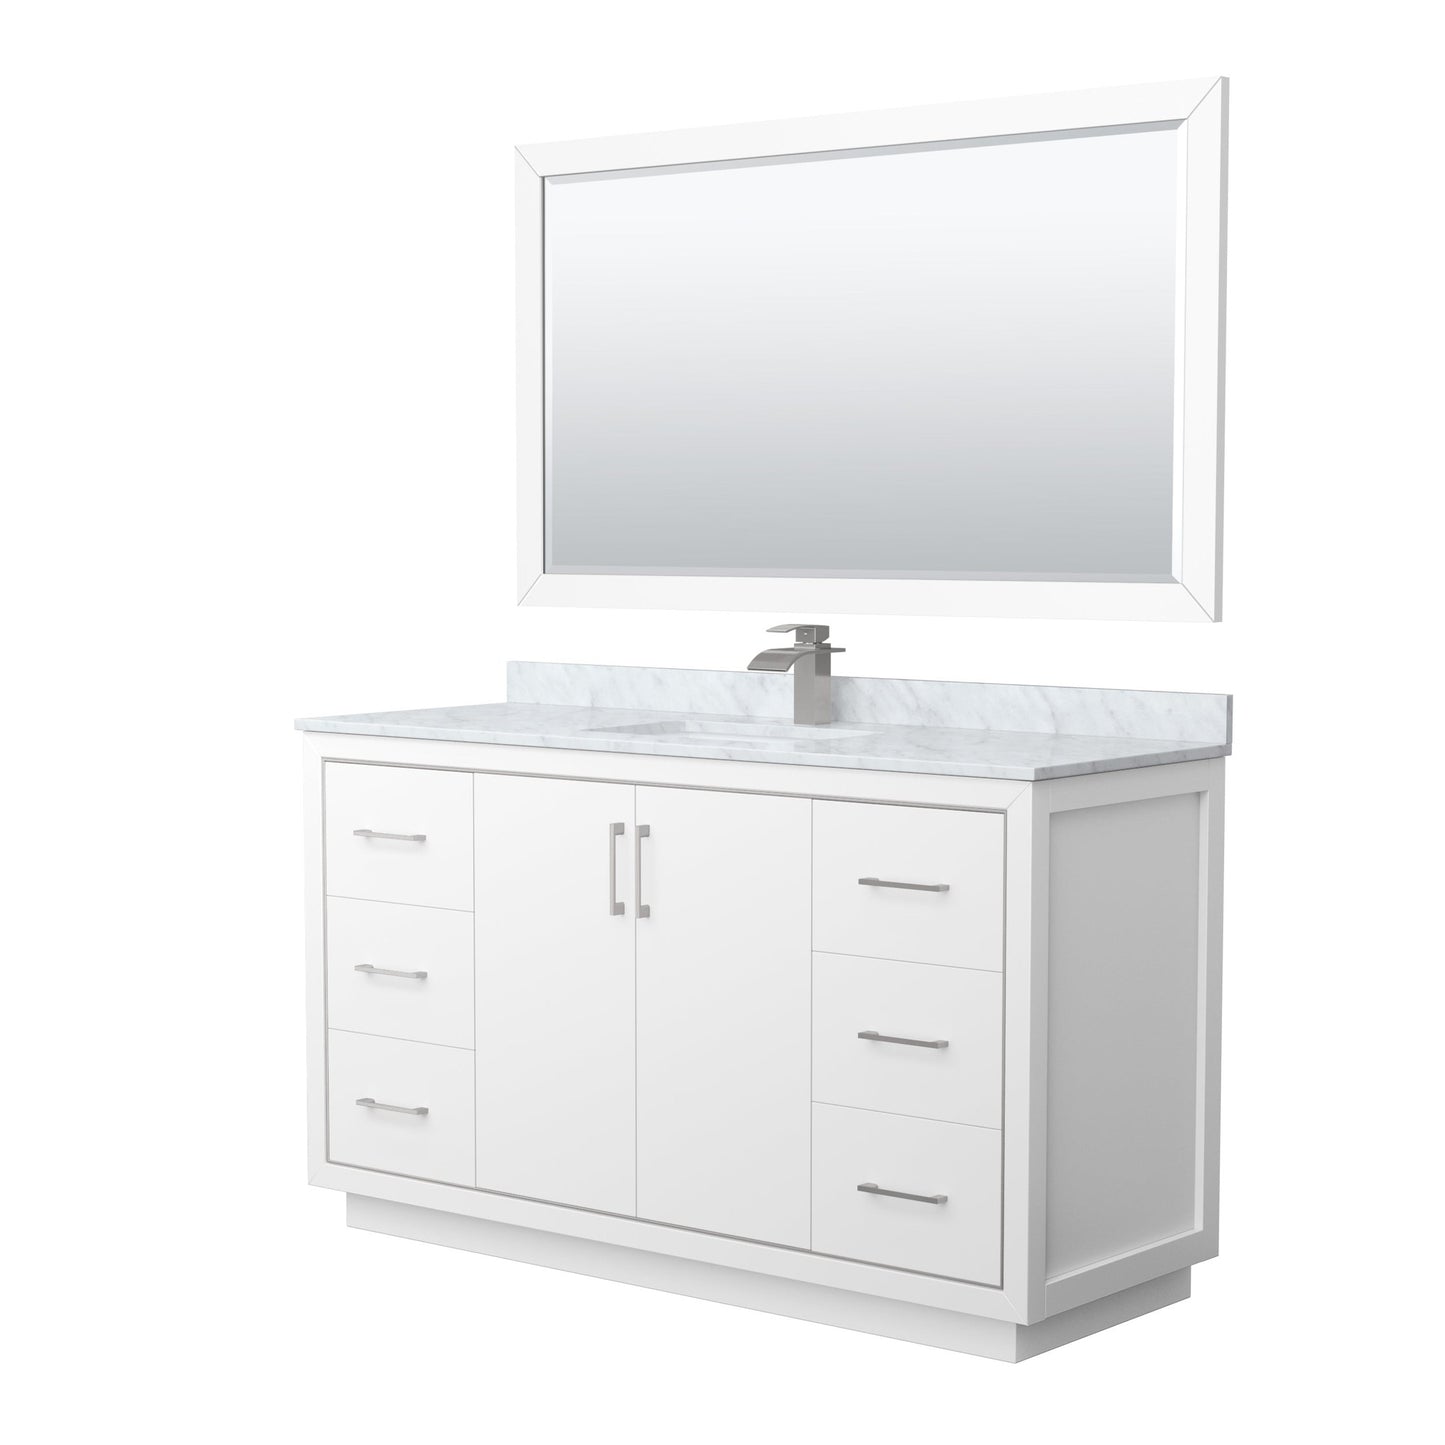 Wyndham Collection Icon 60" Single Bathroom Vanity in White, White Carrara Marble Countertop, Undermount Square Sink, Brushed Nickel Trim, 58" Mirror